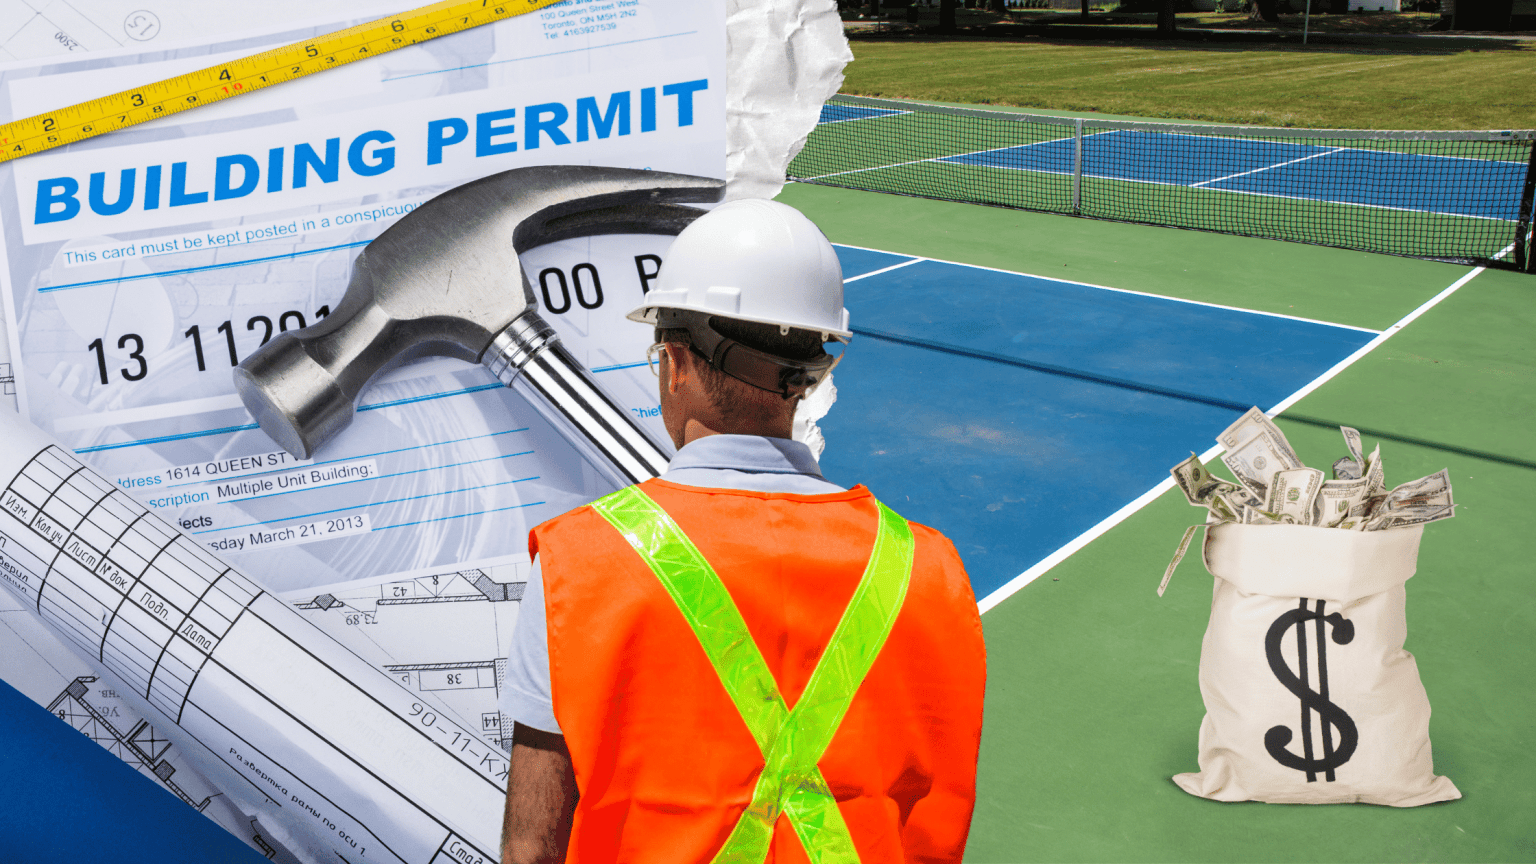 A man builds a community pickleball court with a building permit paper and a bag of money